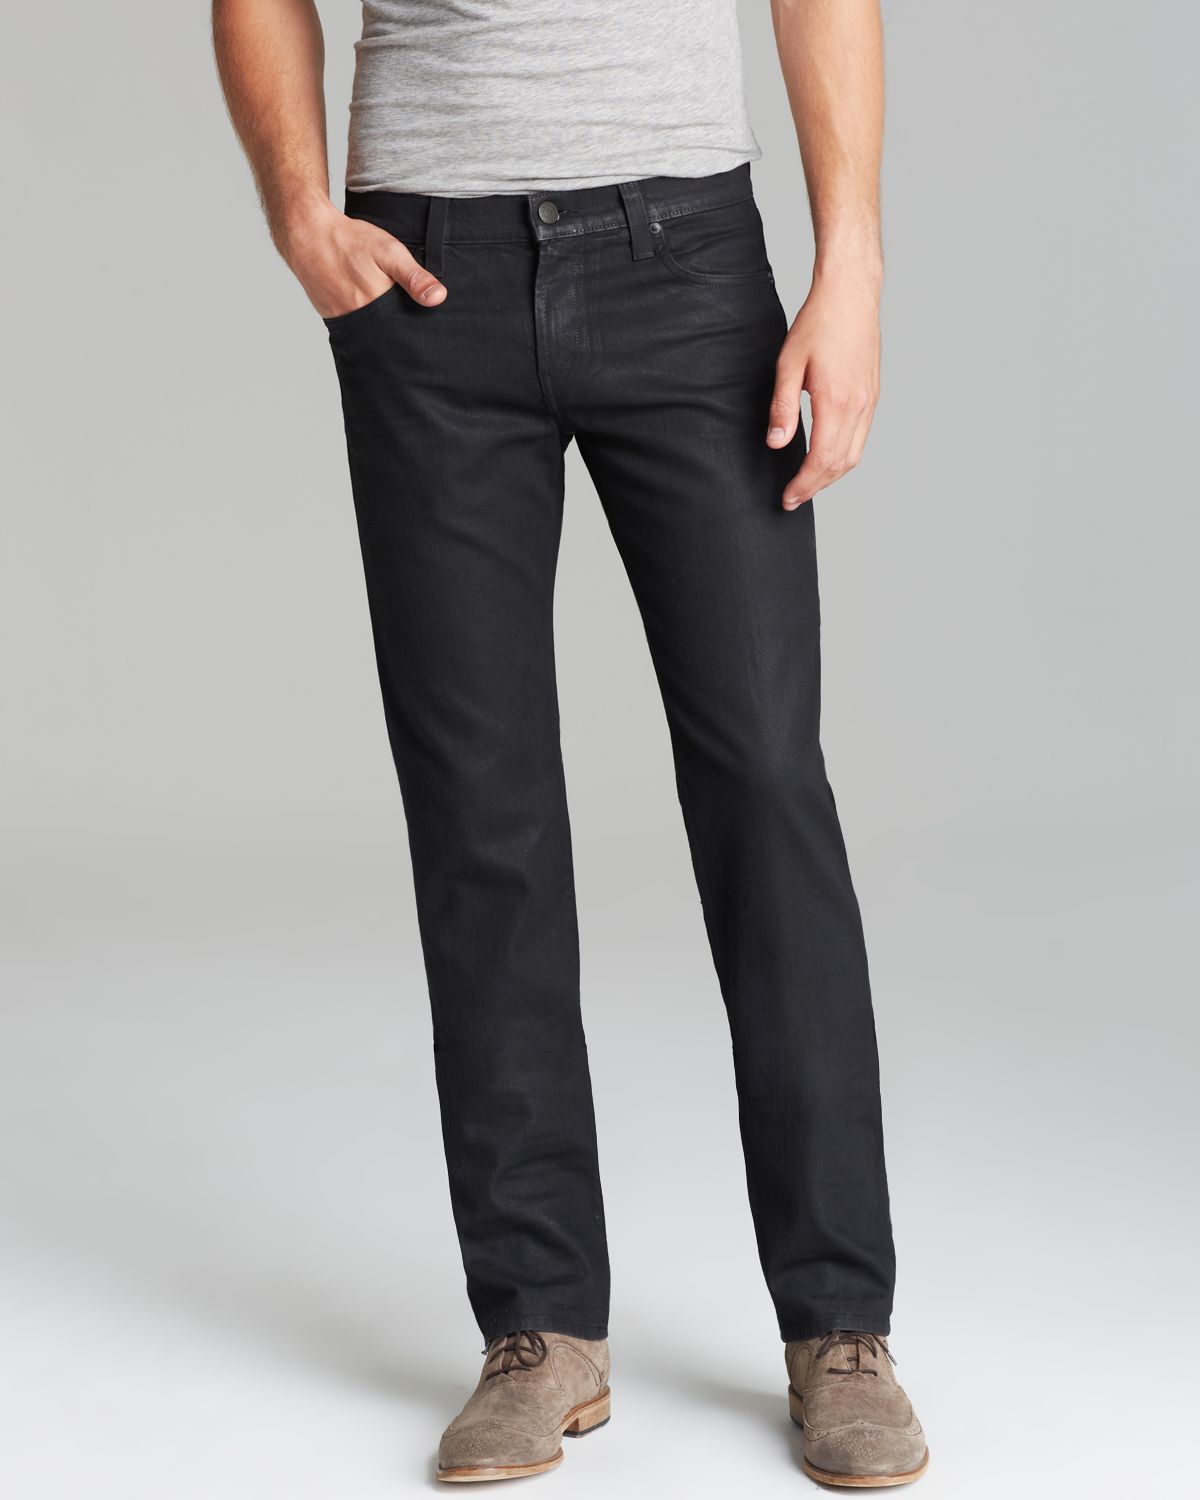 Lyst - J Brand Jeans Coated Kane Slim Straight Fit in Underground in ...